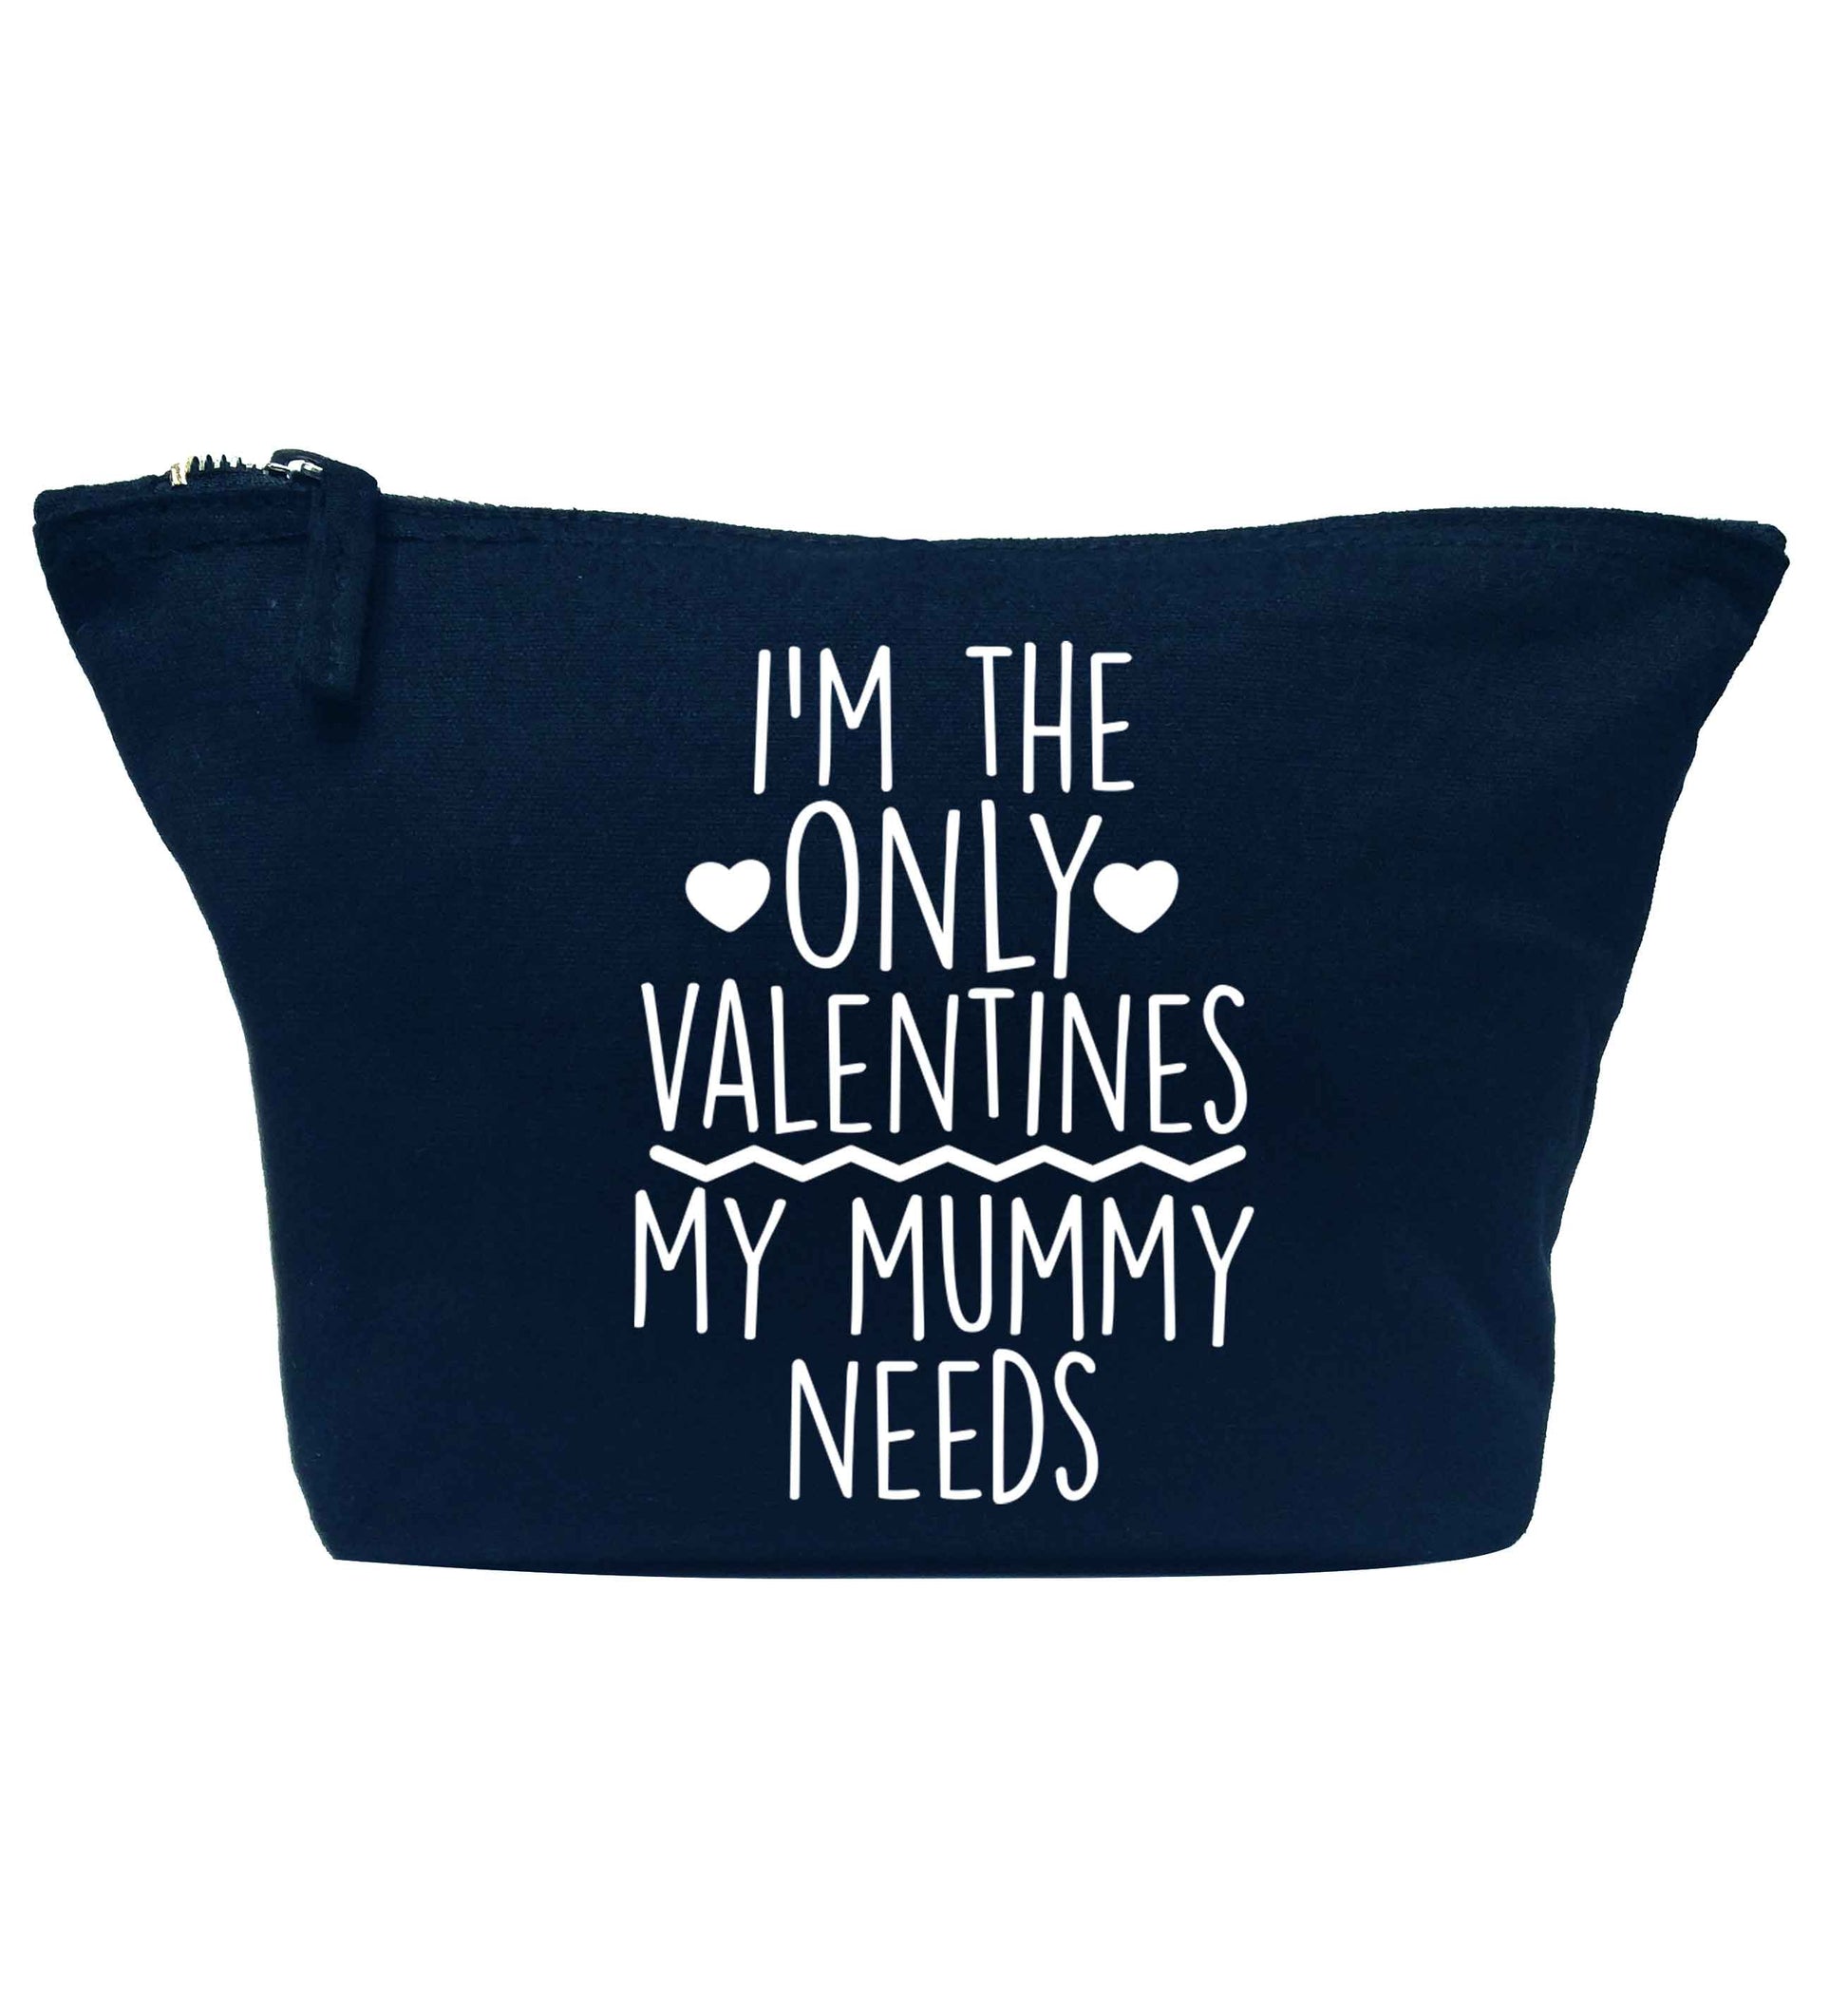 I'm the only valentines my mummy needs navy makeup bag